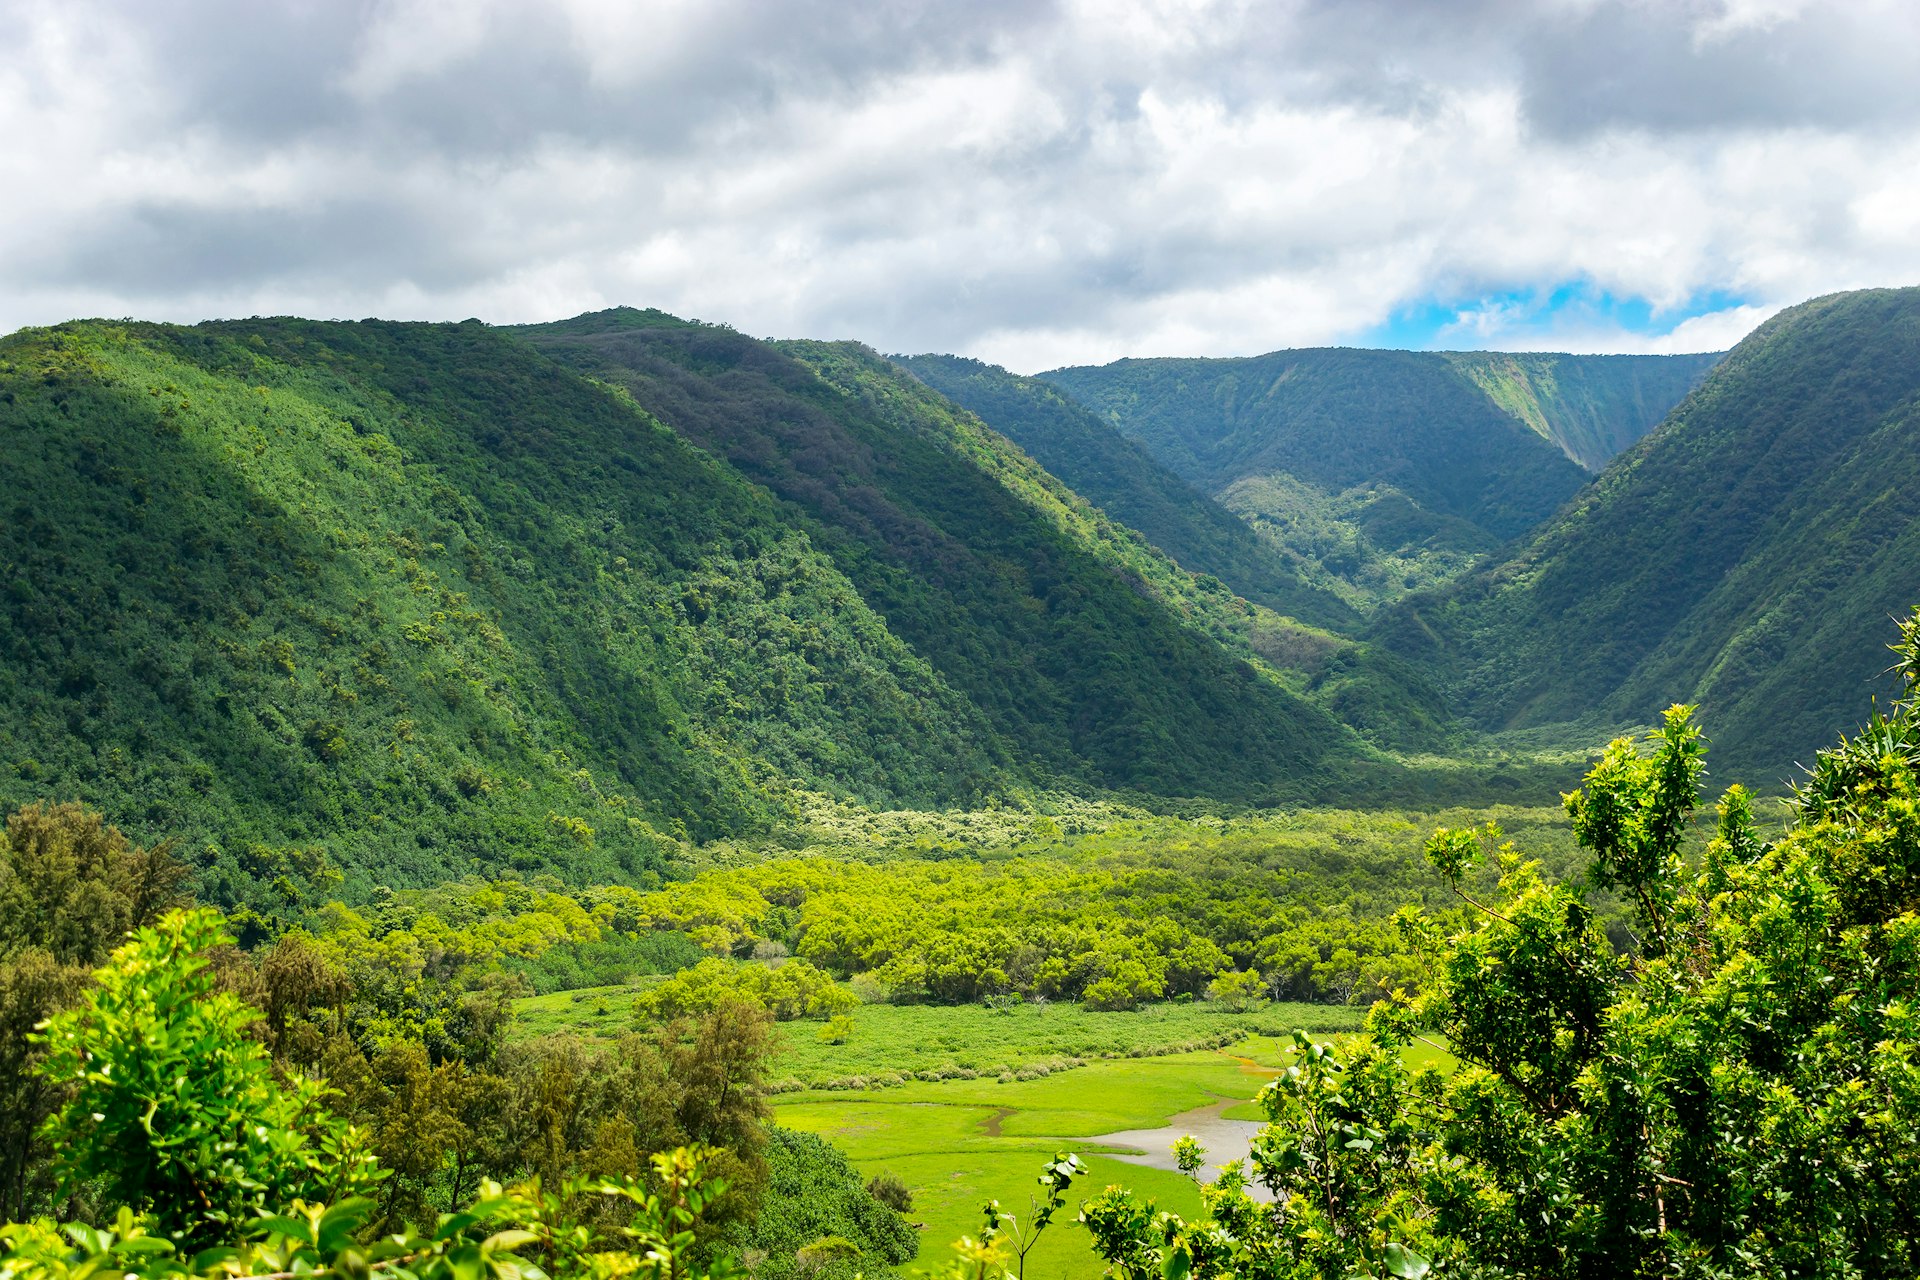 The lush, green mountains of the Pololū Valley, Hawaii